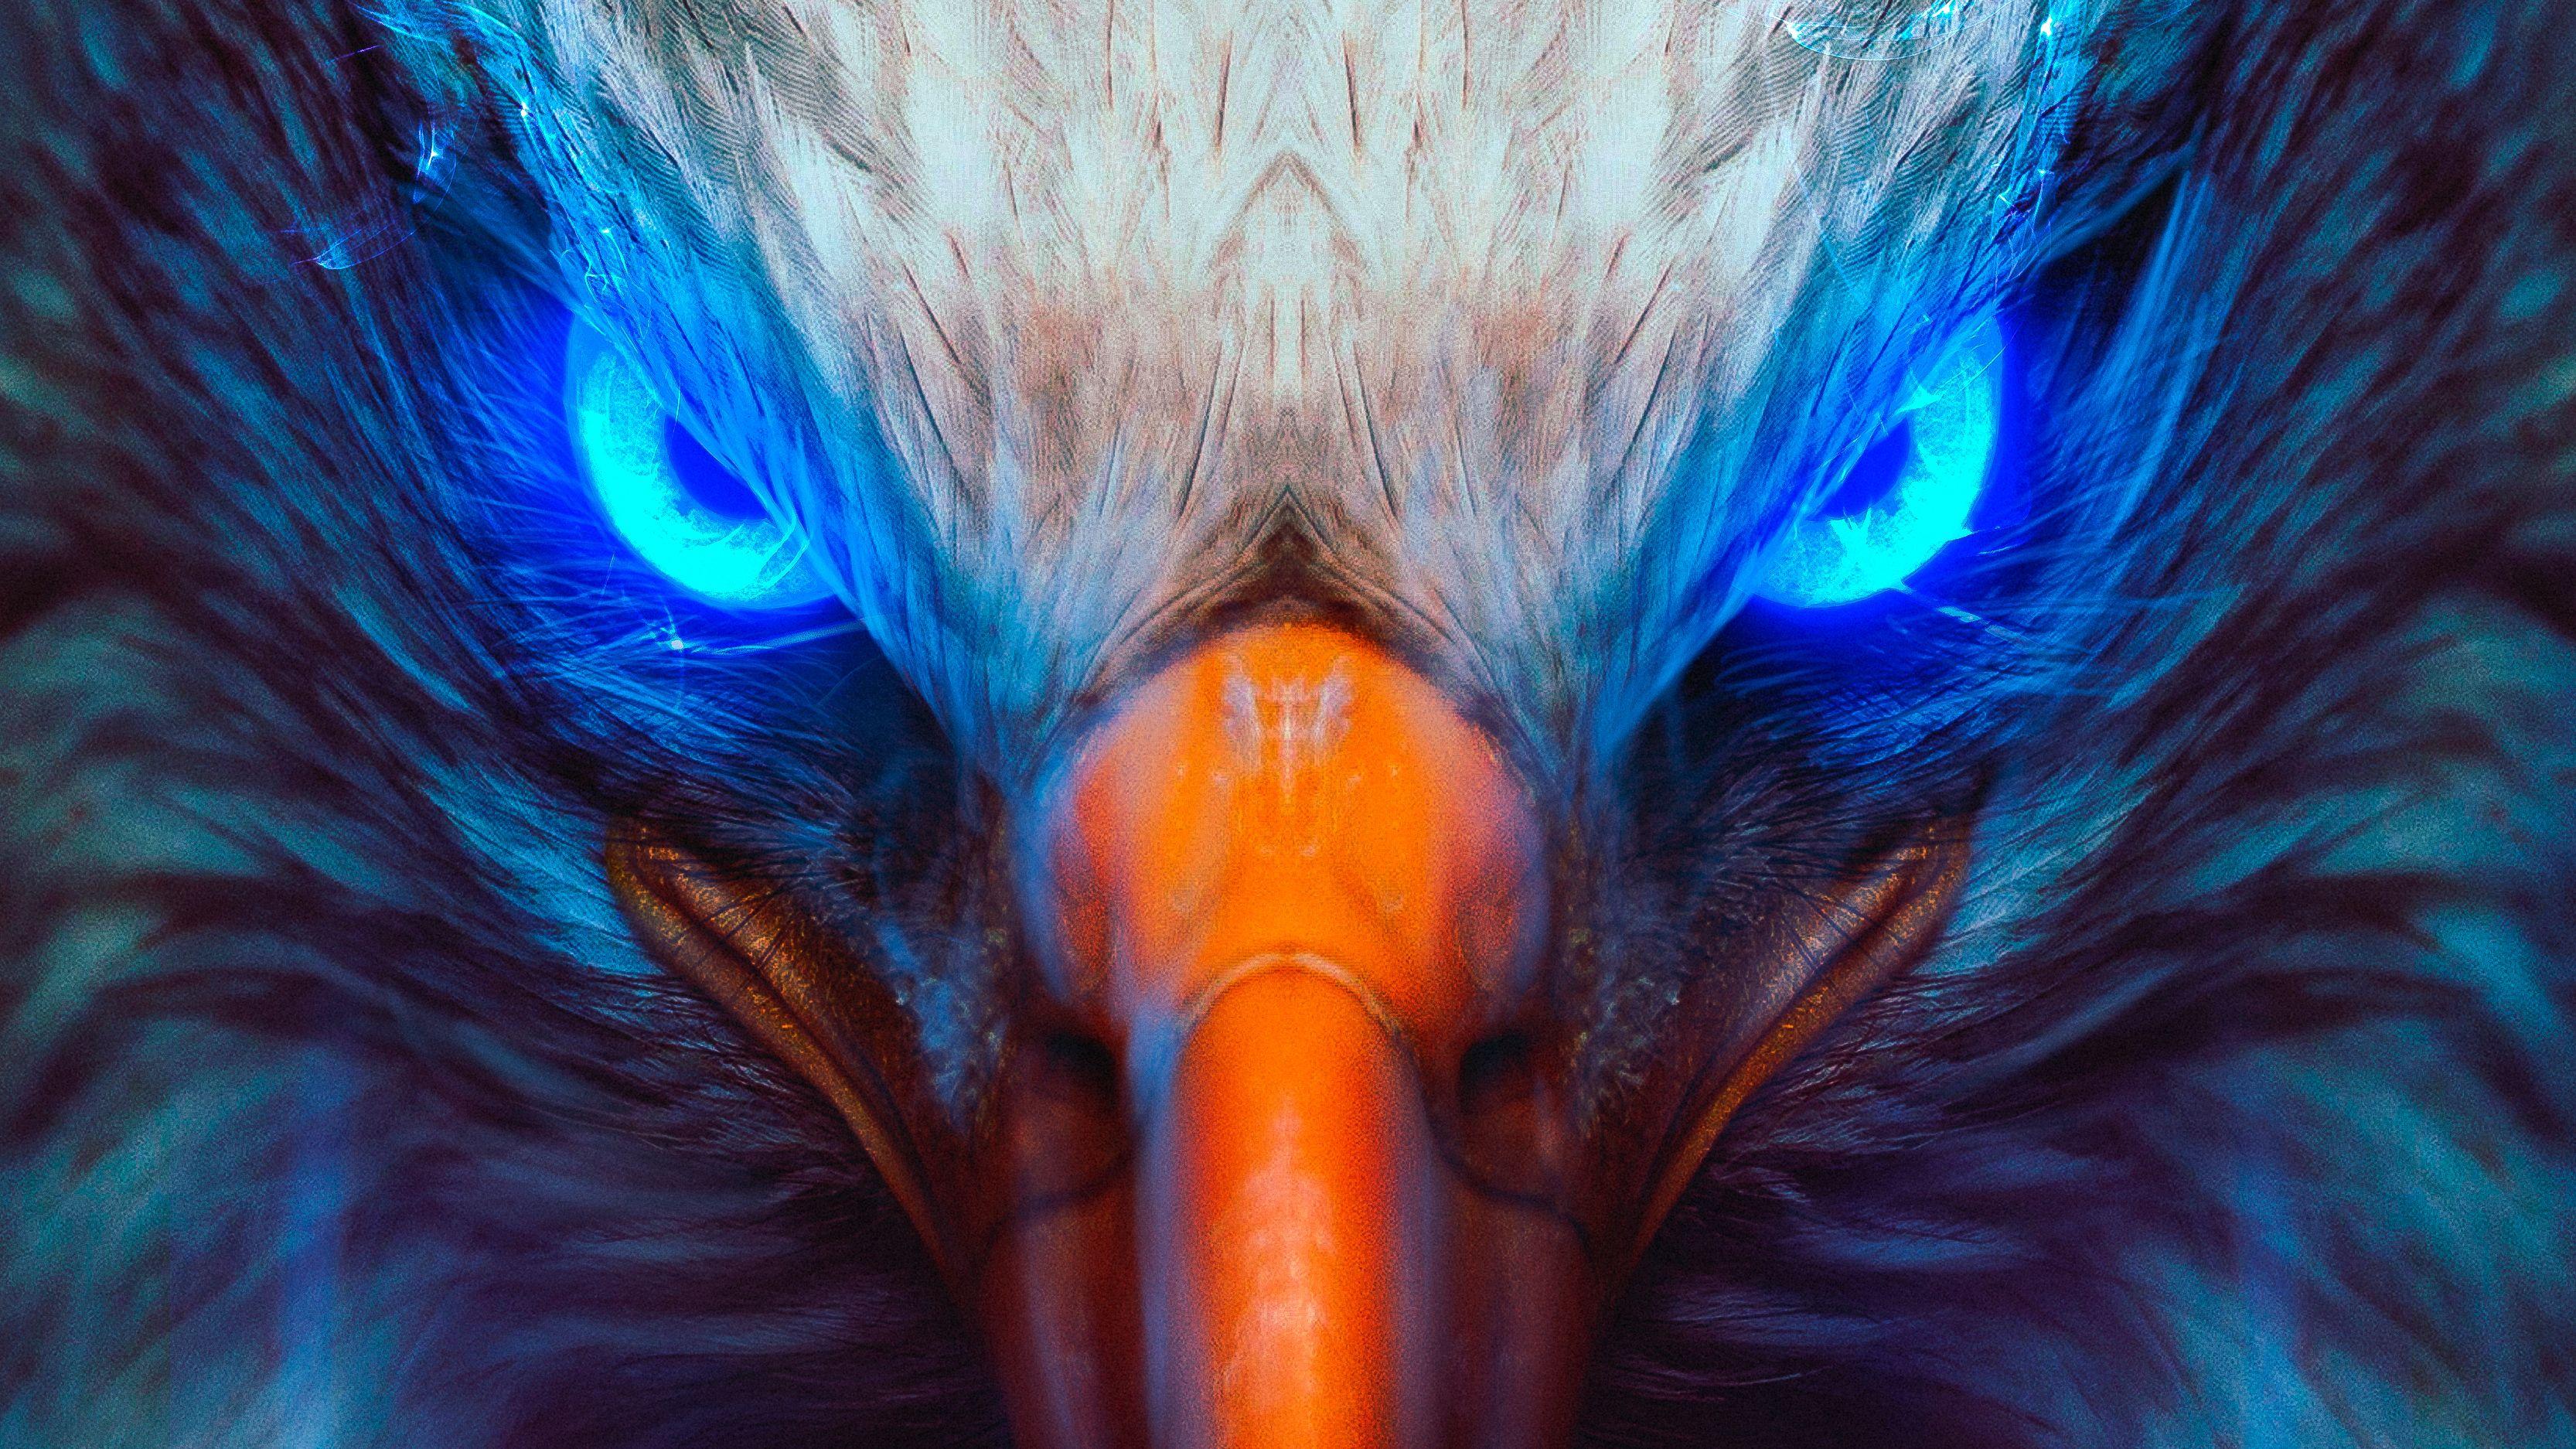 Abstract eagle 1080P 2K 4K 5K HD wallpapers free download  Wallpaper  Flare